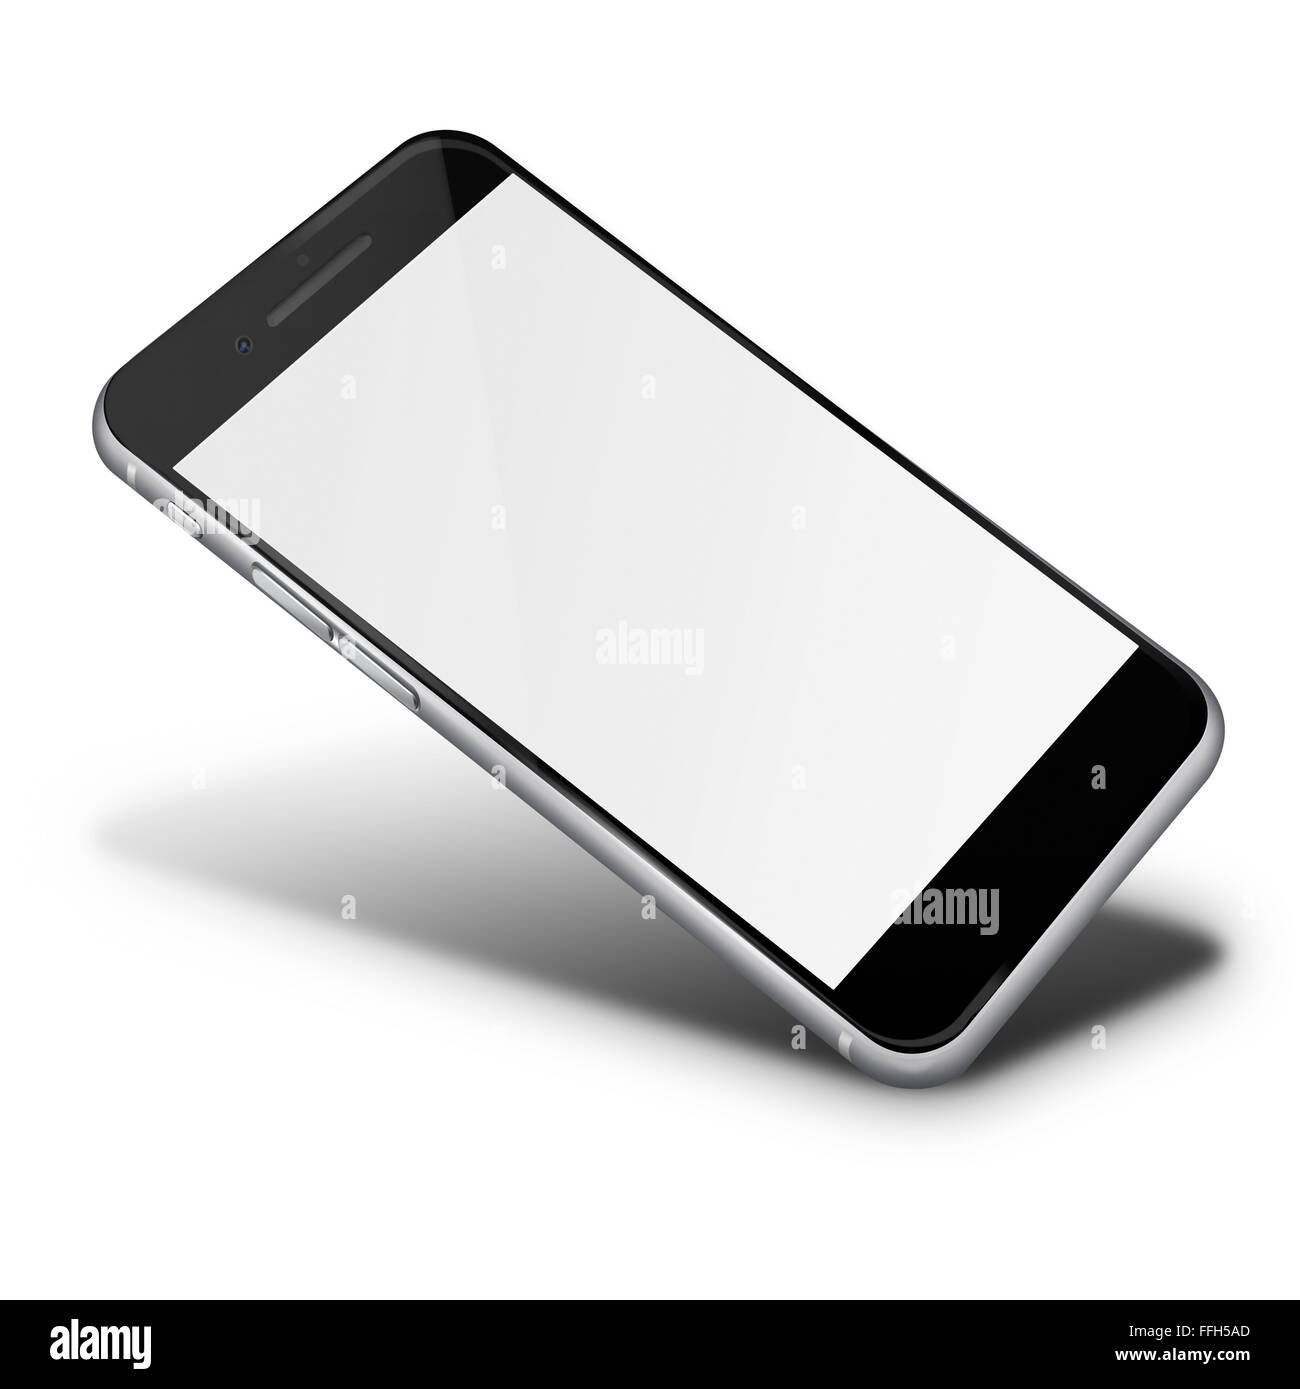 Realistic mobile phone touch screen smartphone with blank screen with shadows isolated on white background. Stock Photo